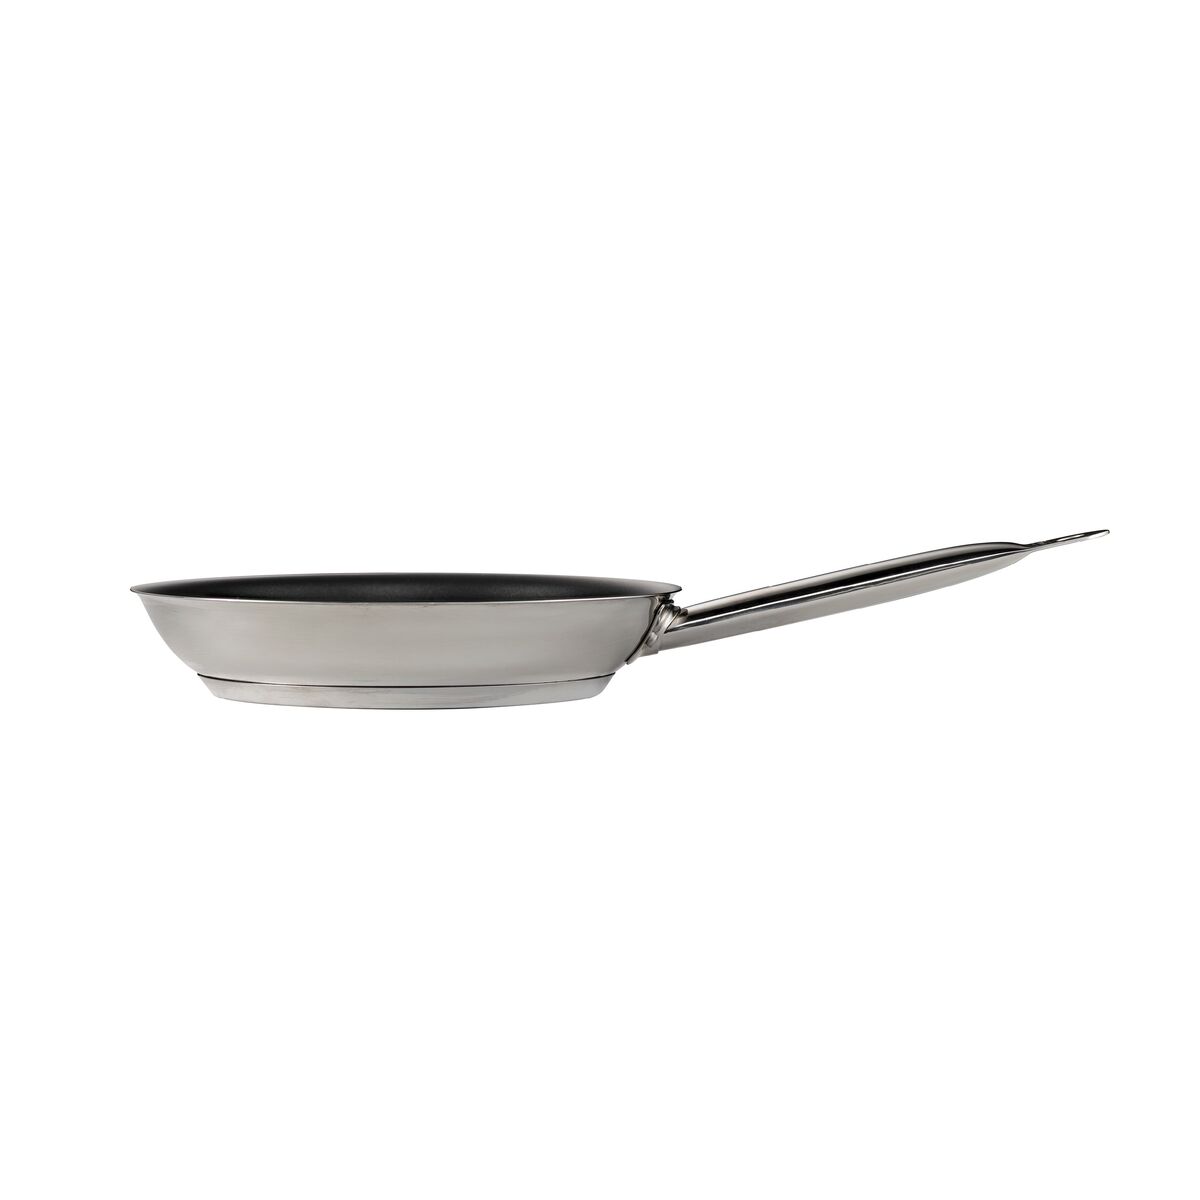 Tramontina Tri-Ply Base Nonstick Induction-Ready 10 Fry Pan